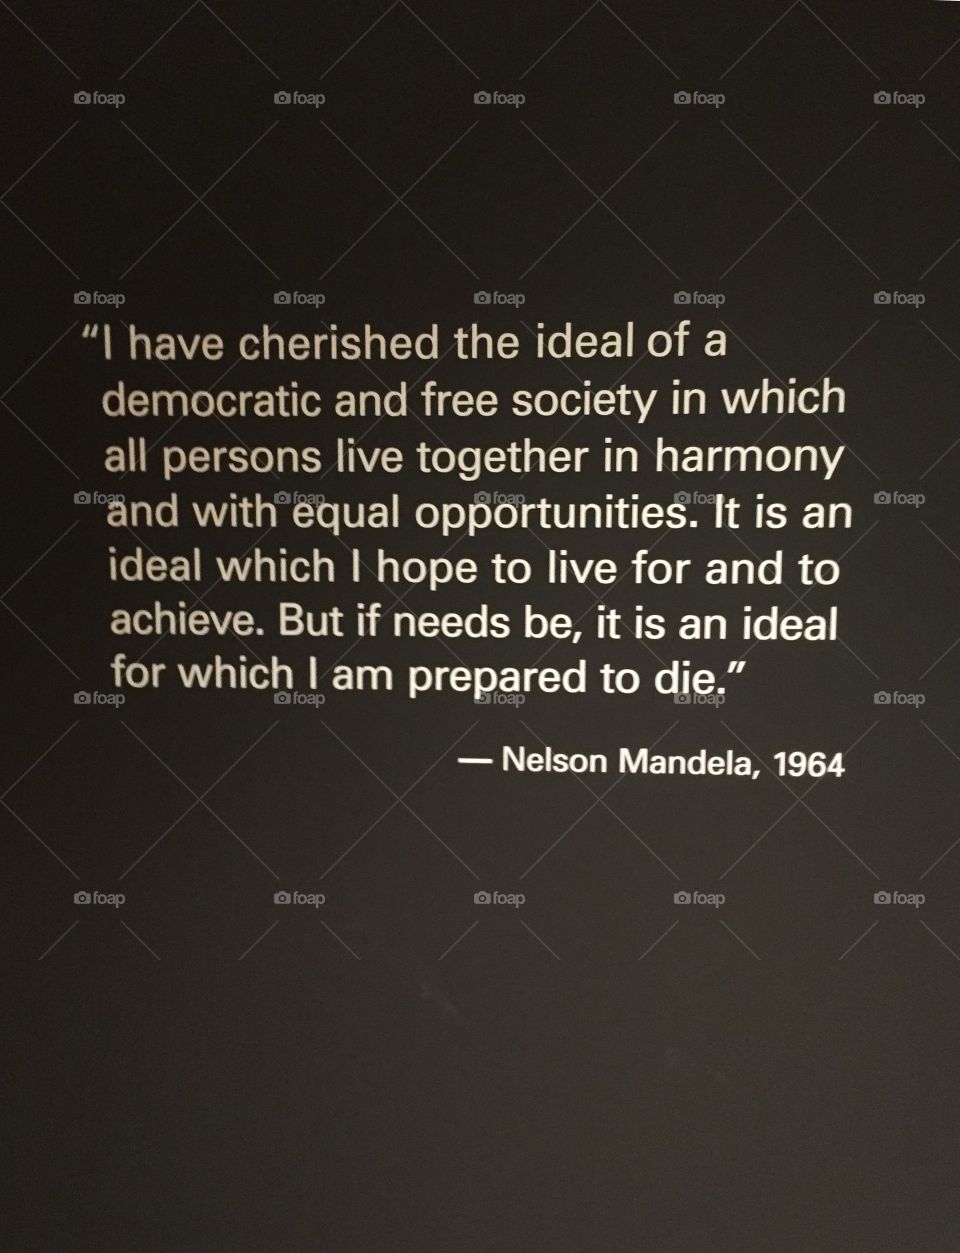 Quote by Nelson Mandela 